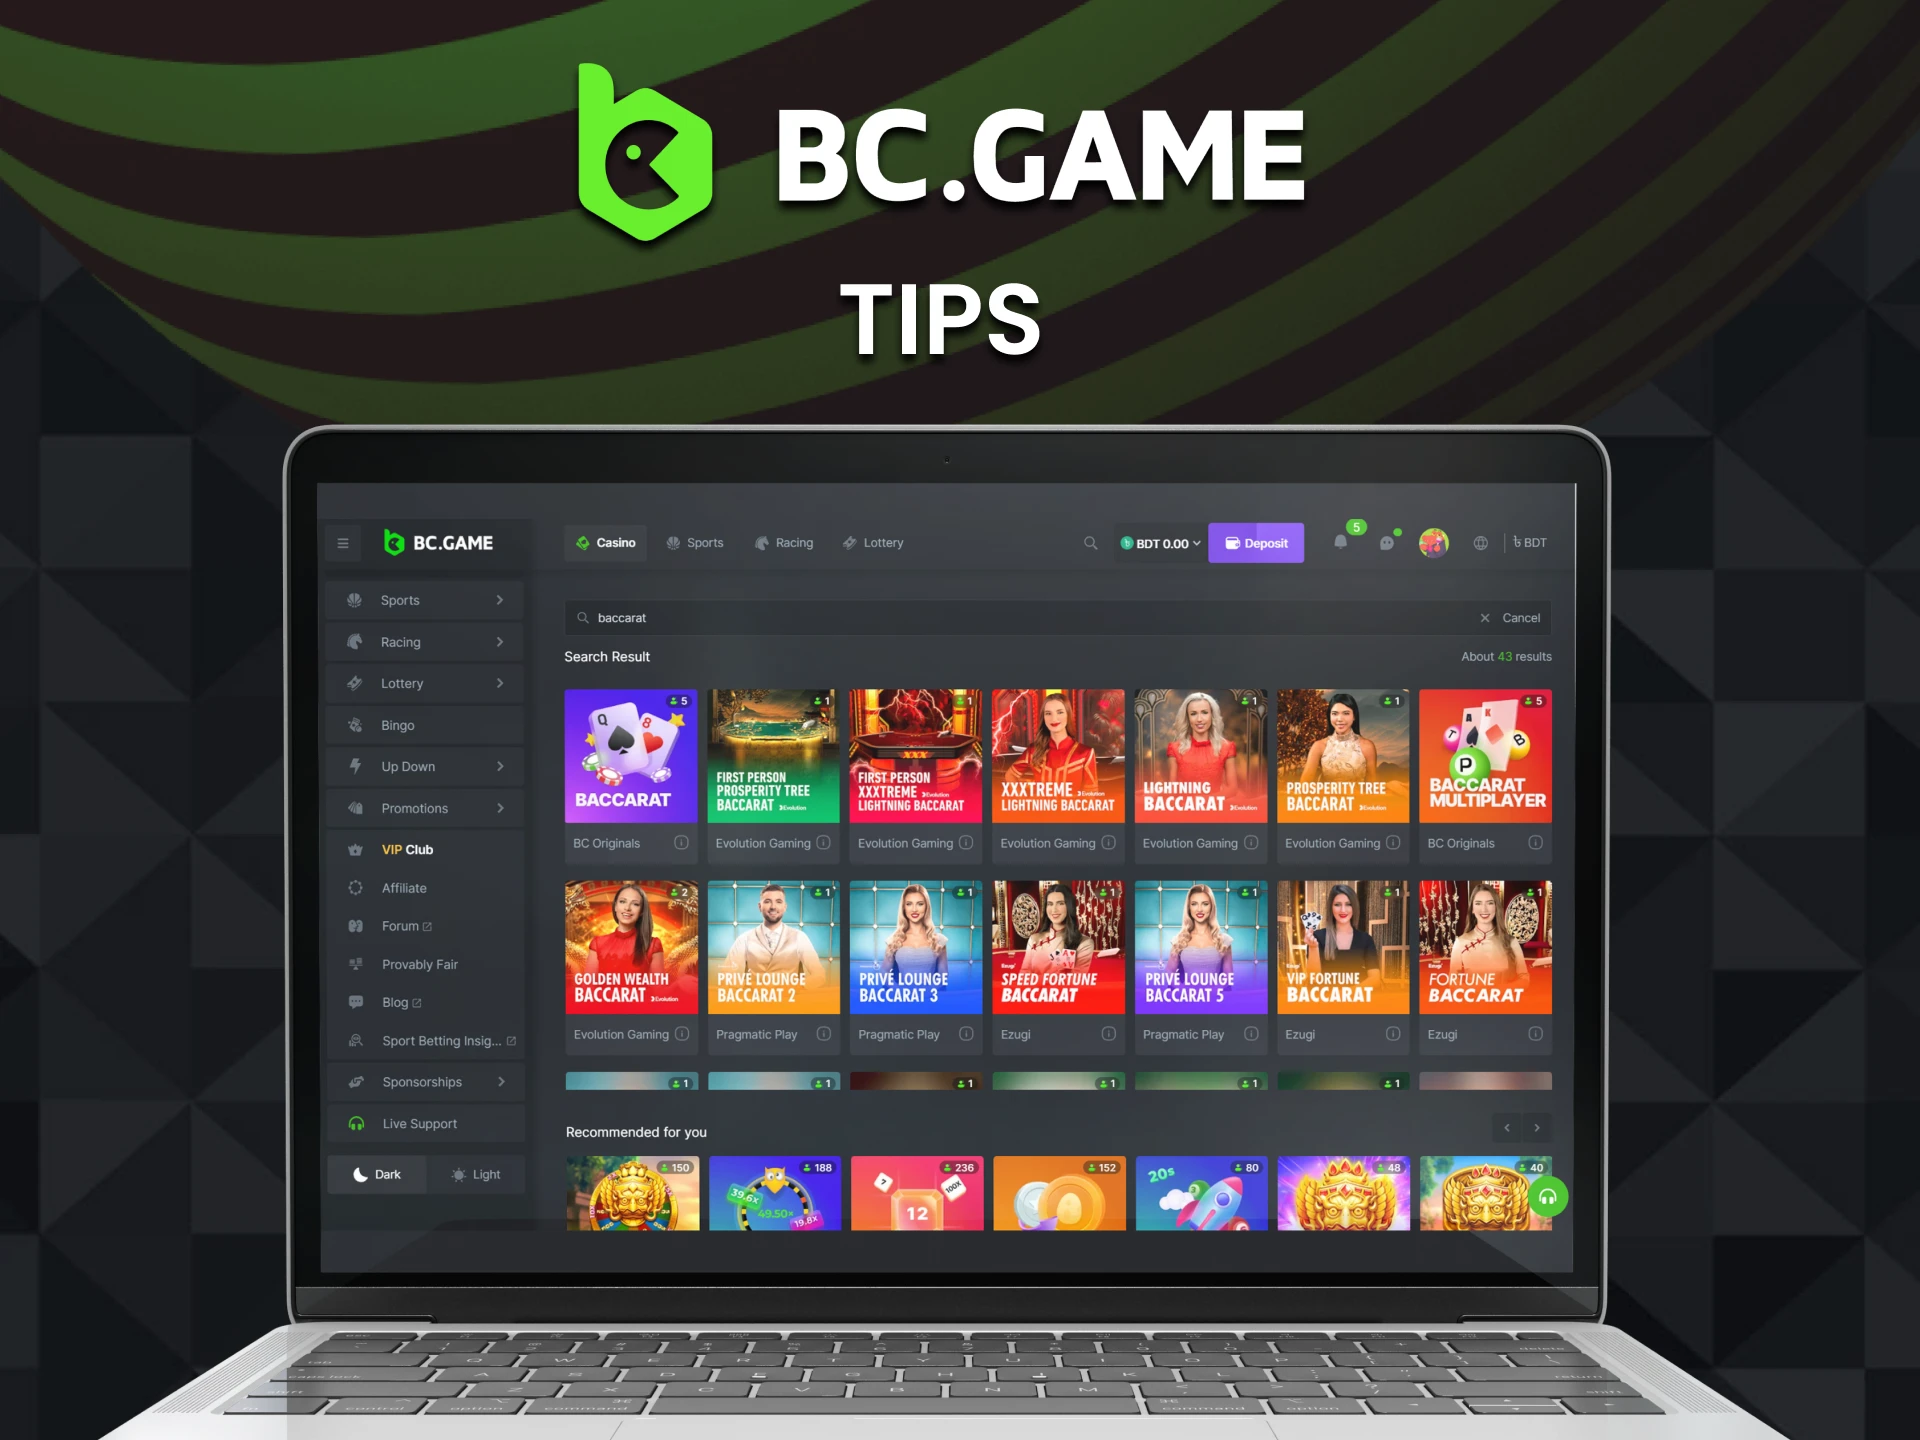 We will give tips for playing baccarat on BC Game.